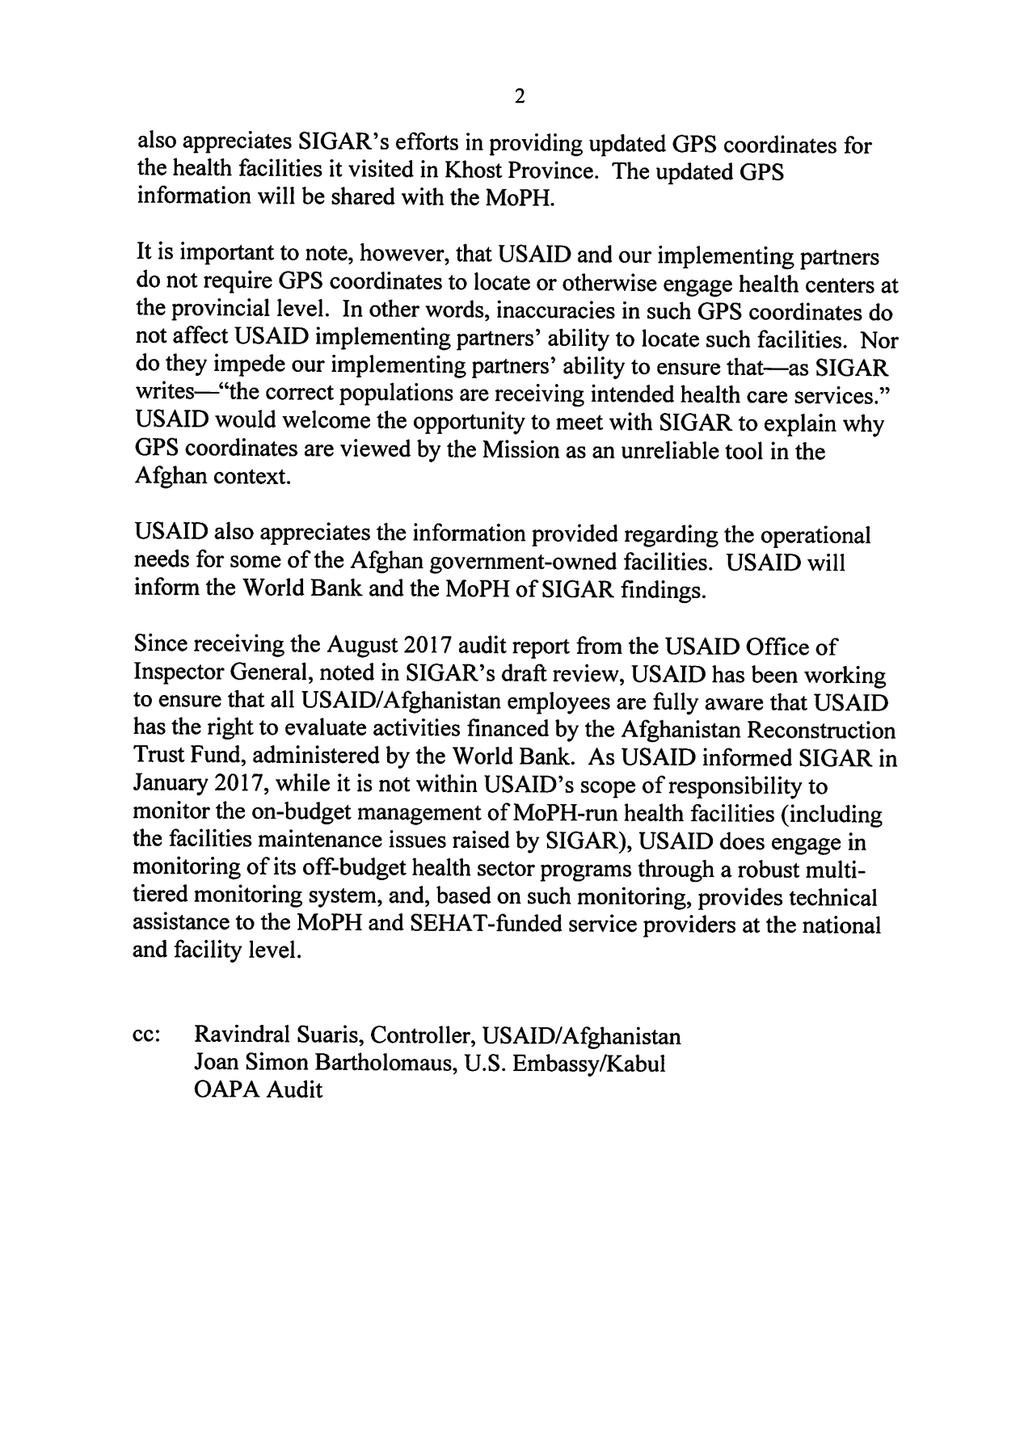 SIGAR-18-13-SP Review: USAID Supported